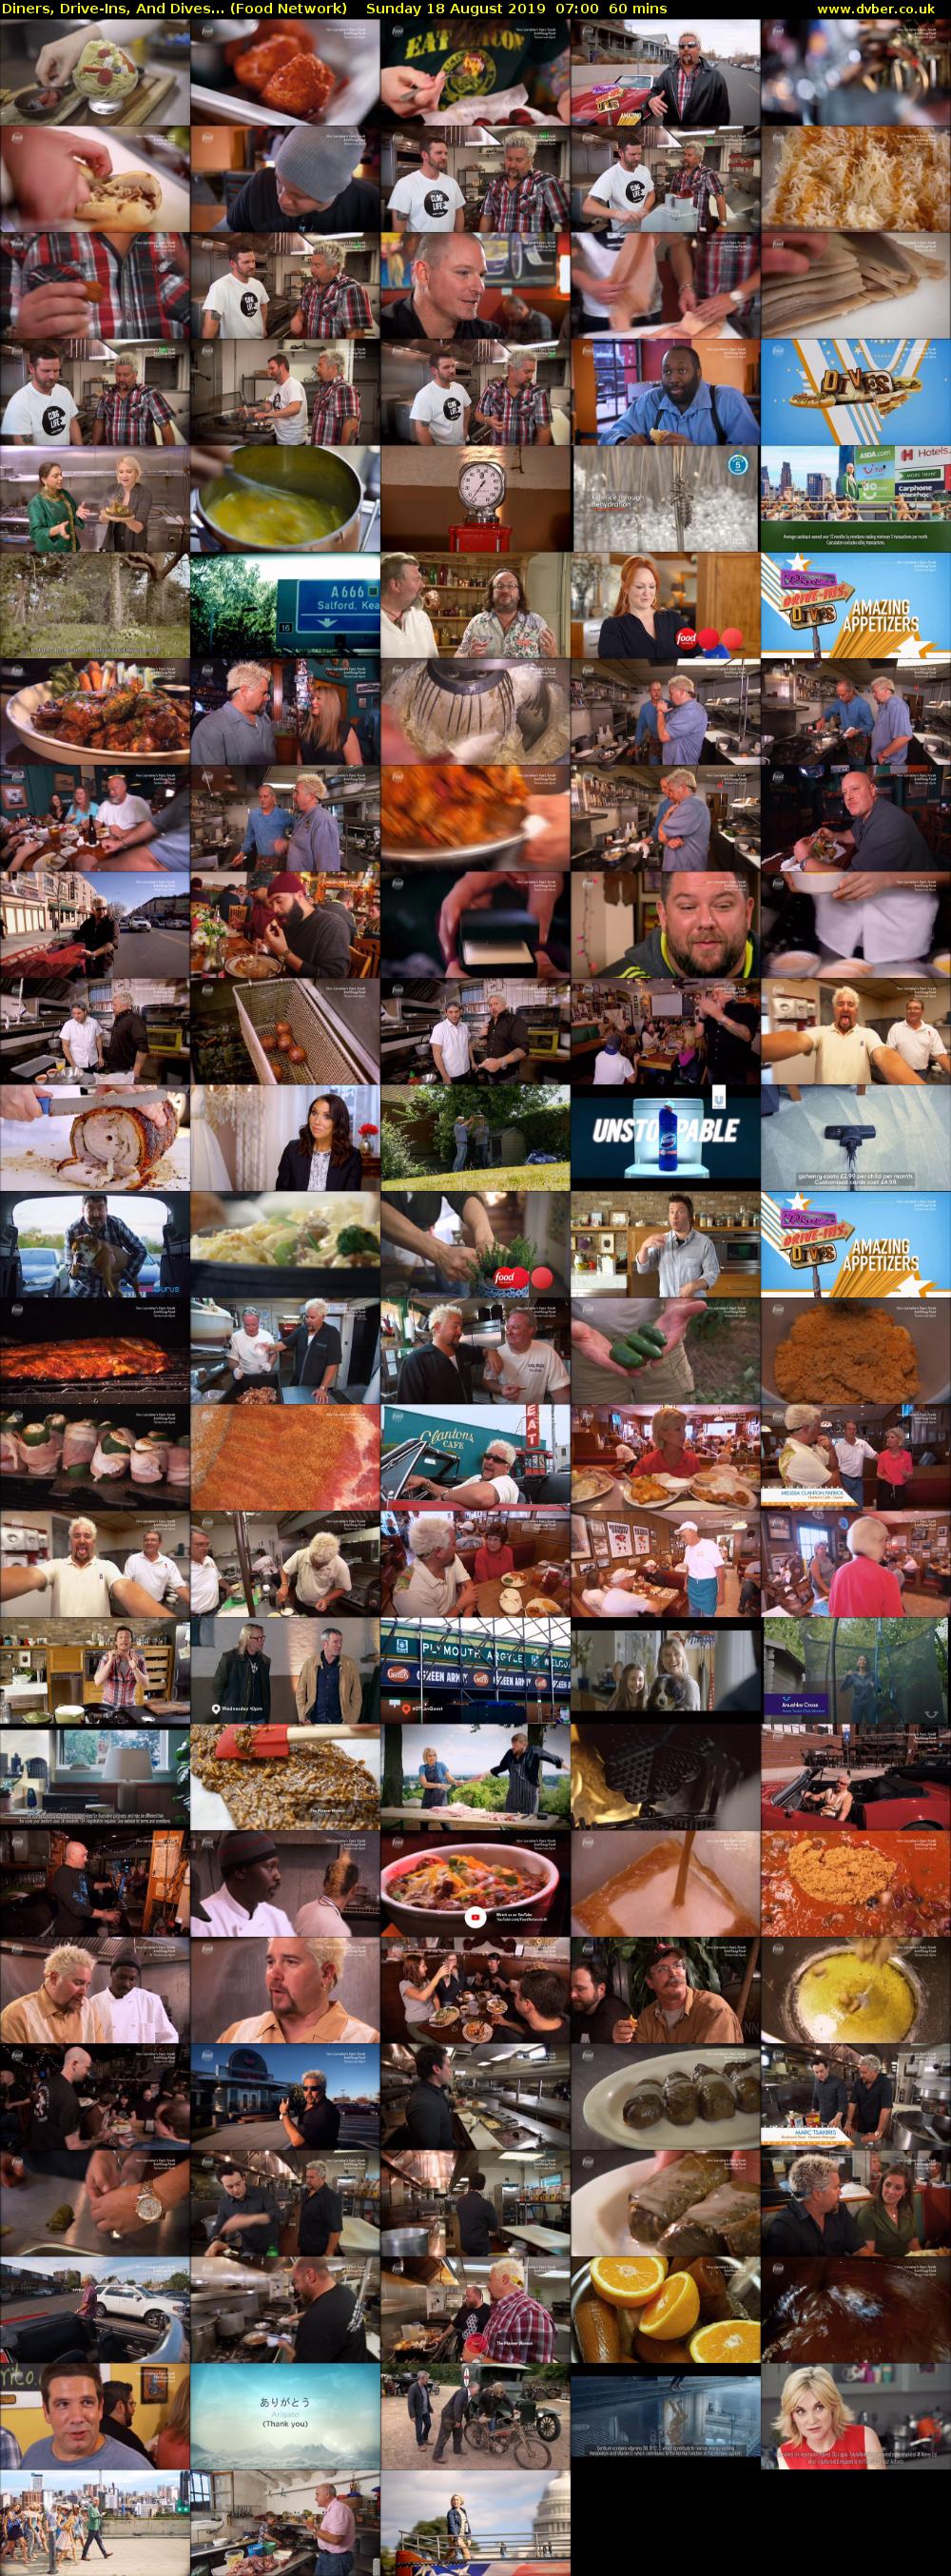 Diners, Drive-Ins, And Dives... (Food Network) Sunday 18 August 2019 07:00 - 08:00